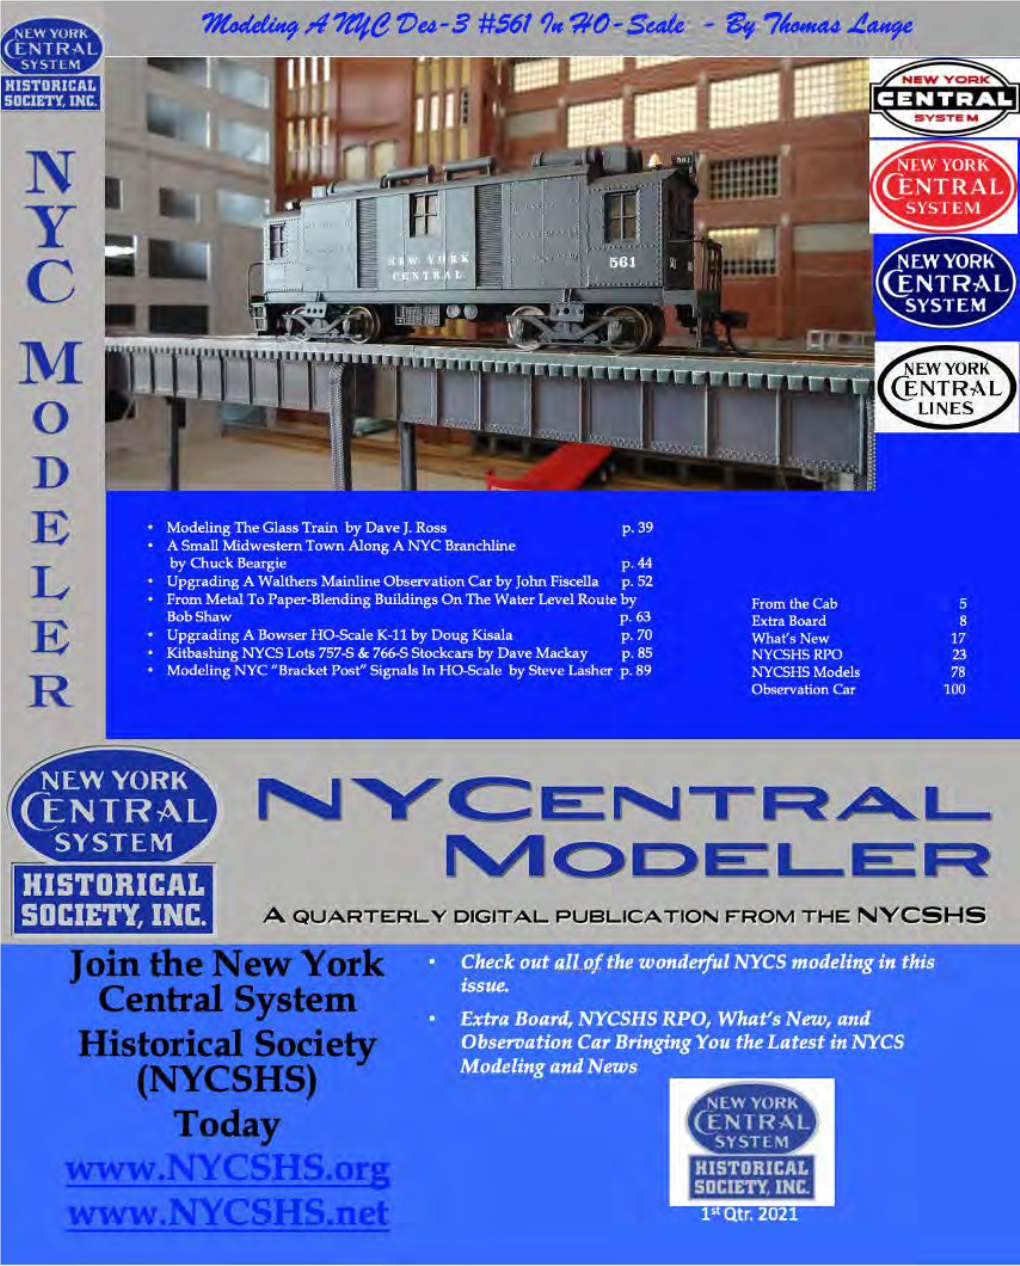 HO-Scale #562 in HO-Scale – Page 35 by Thomas Lange Page 35